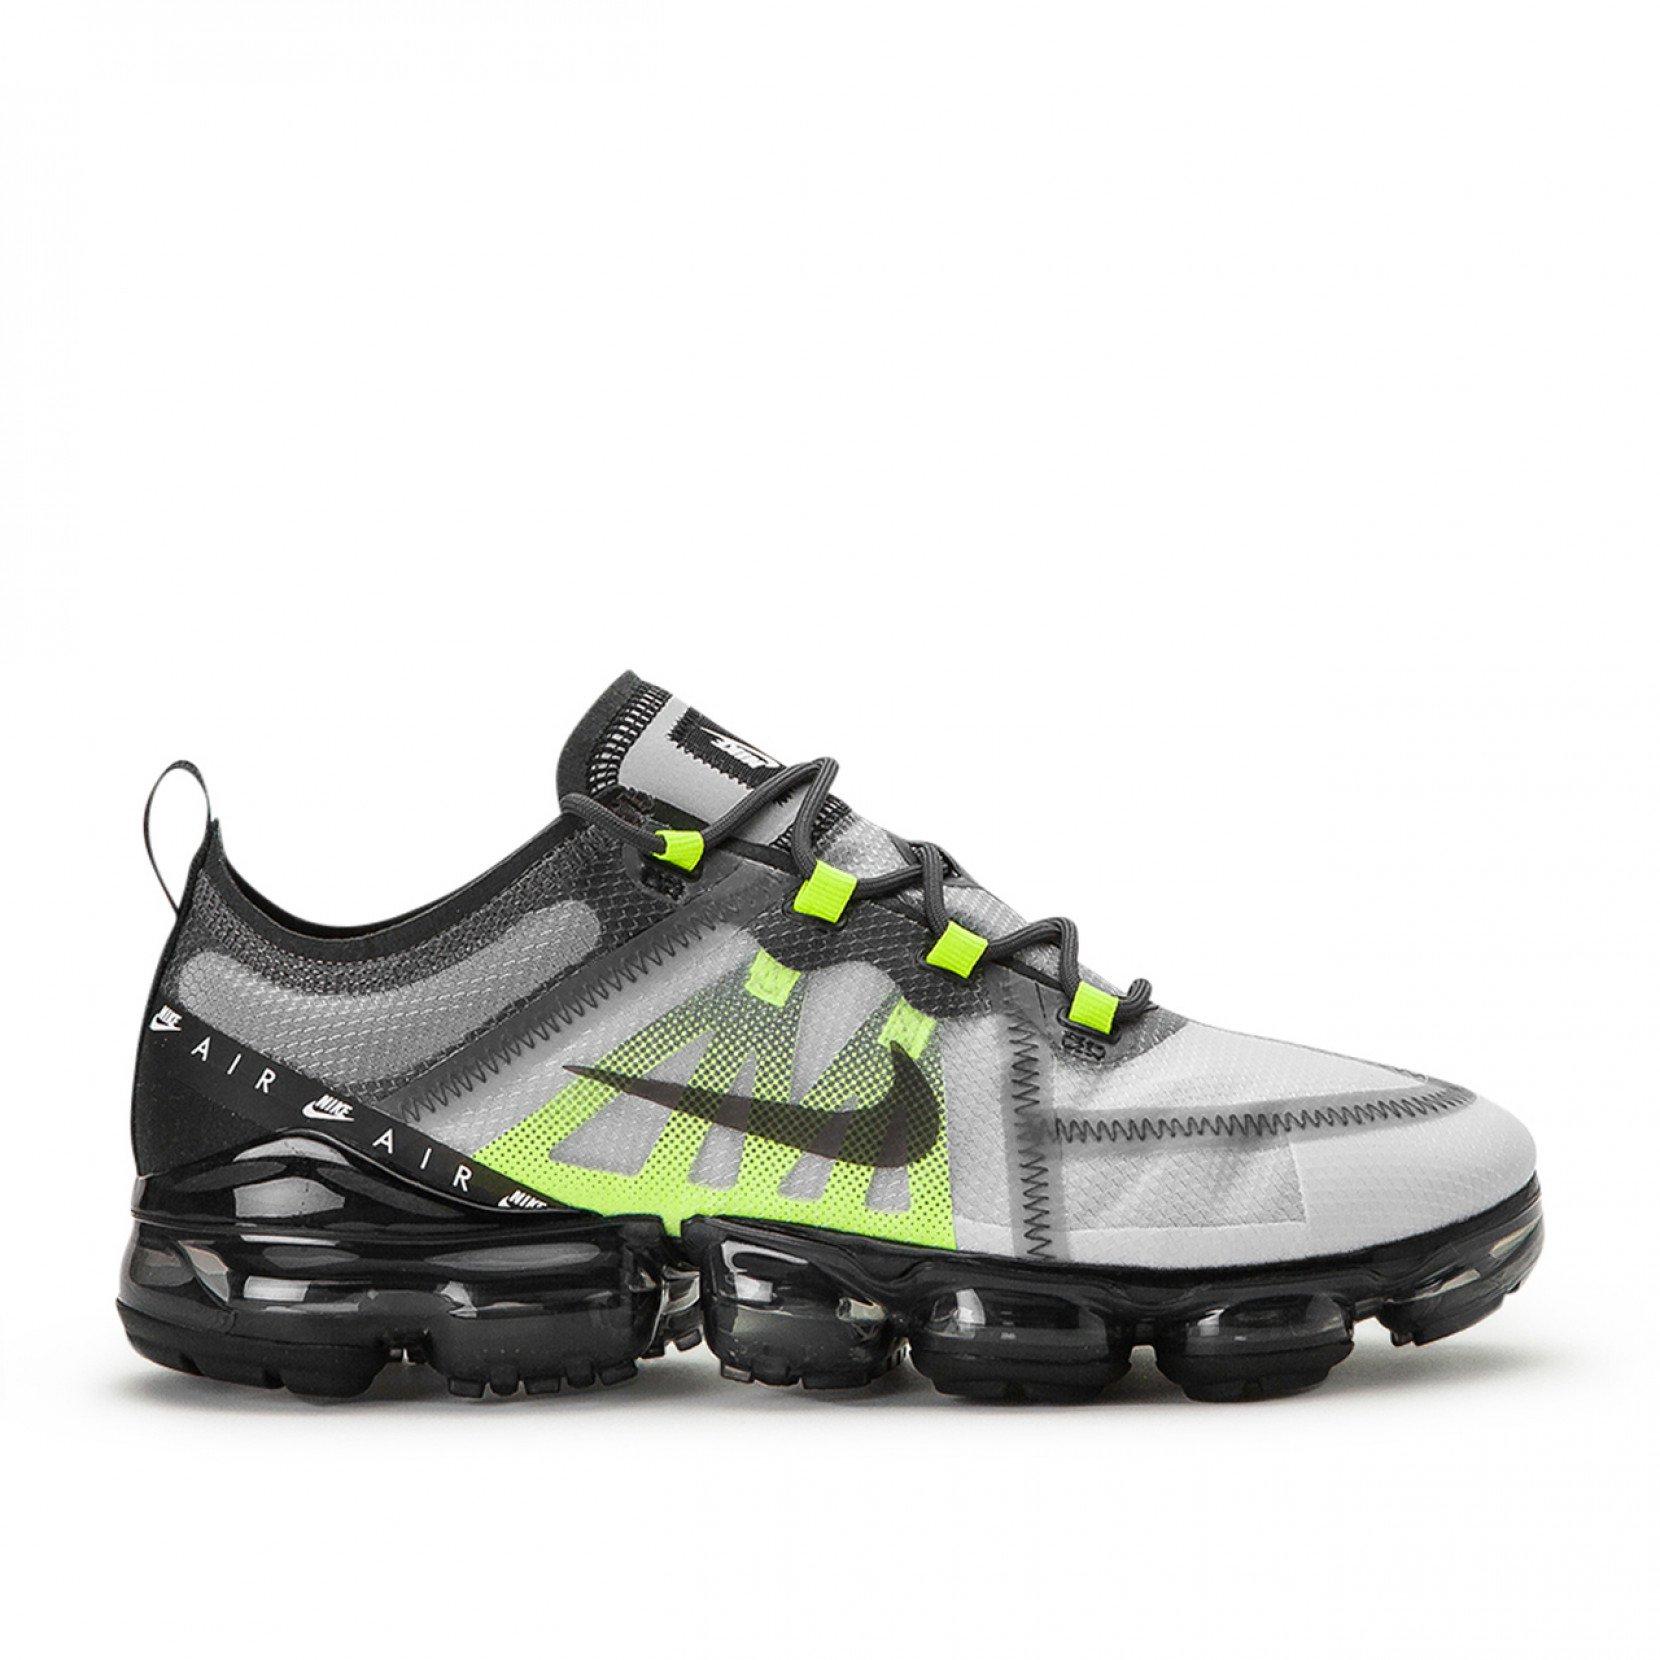 Nike Synthetic Air Vapormax 2019 Lx in Grey (Gray) for Men - Lyst